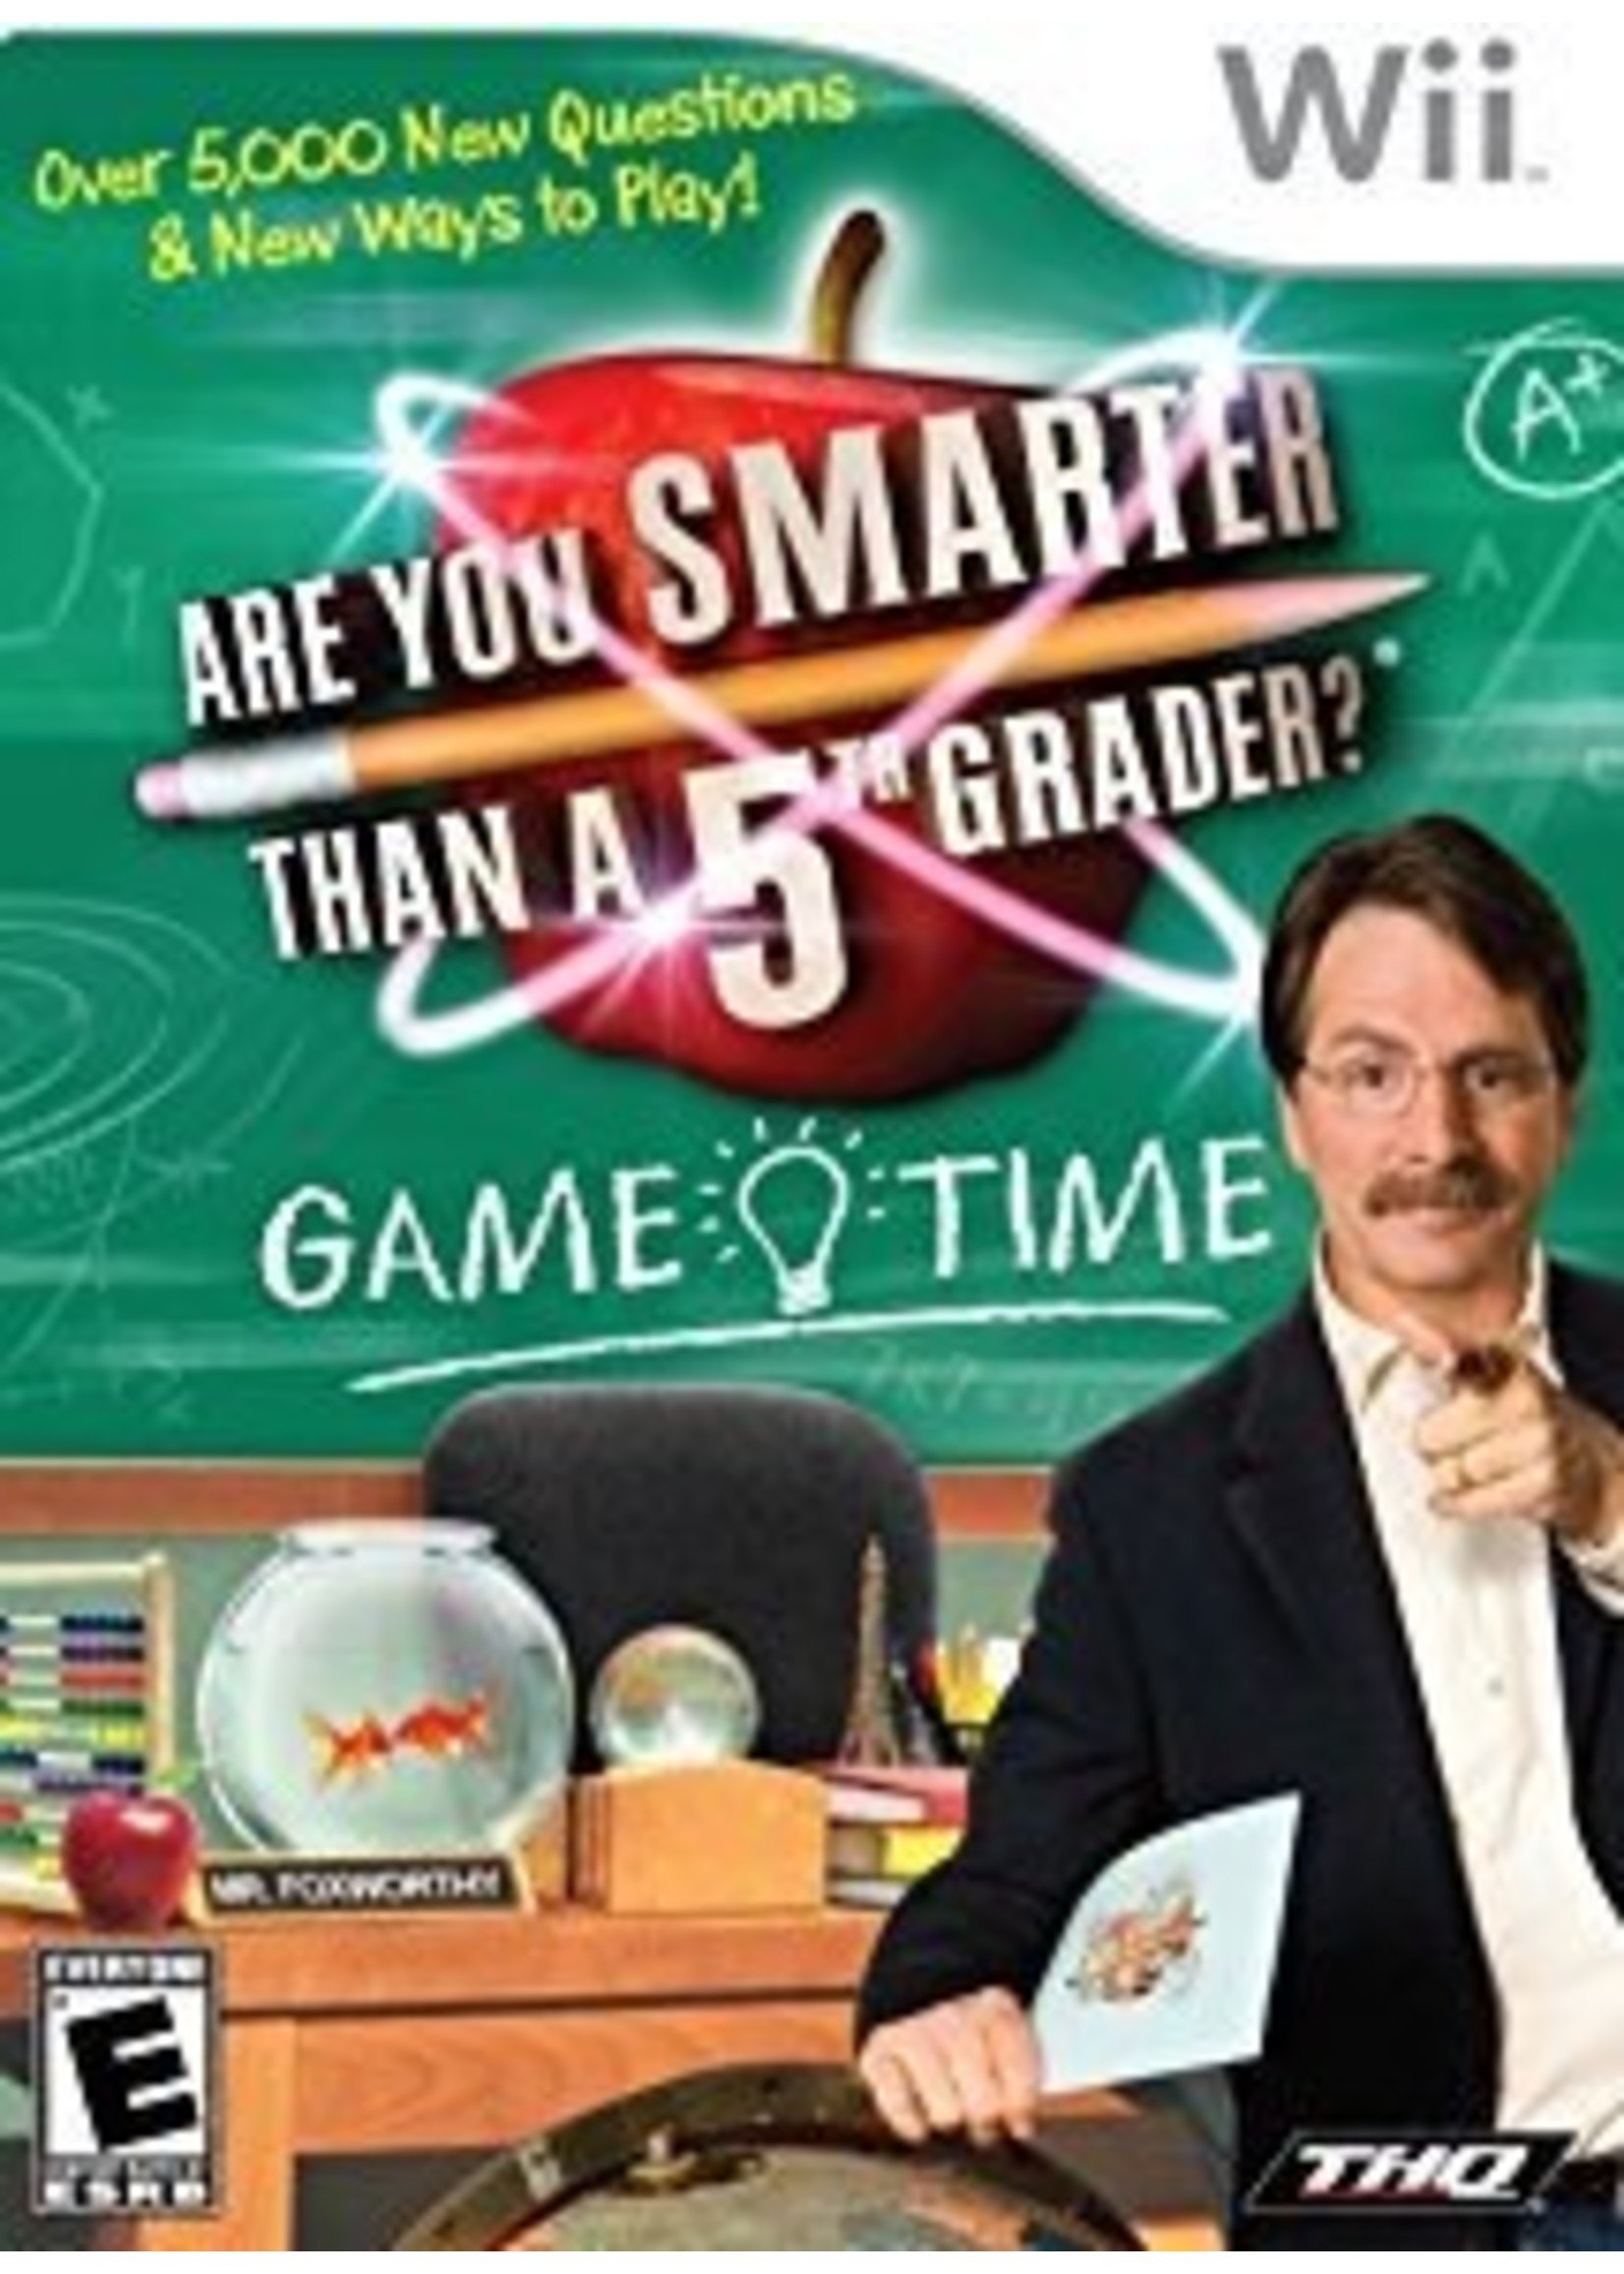 Nintendo Wii Are You Smarter Than A 5th Grader? Game Time